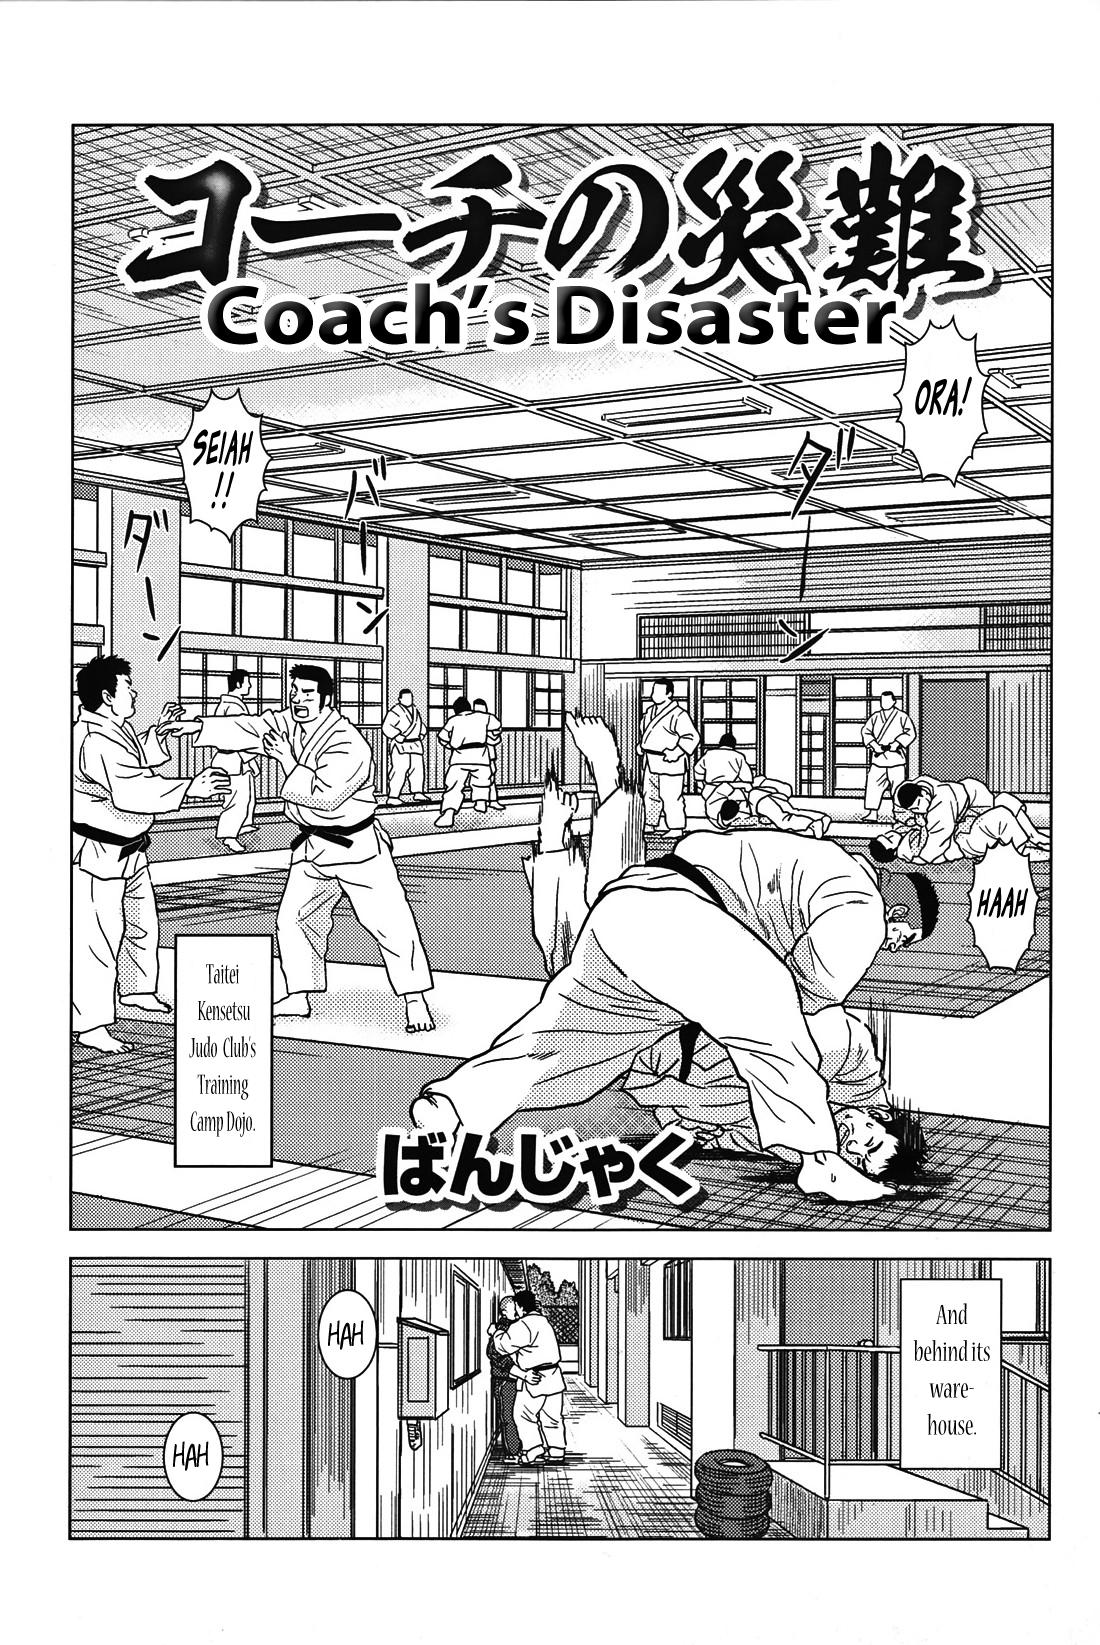 Kink Coach's Disaster Massive - Picture 1